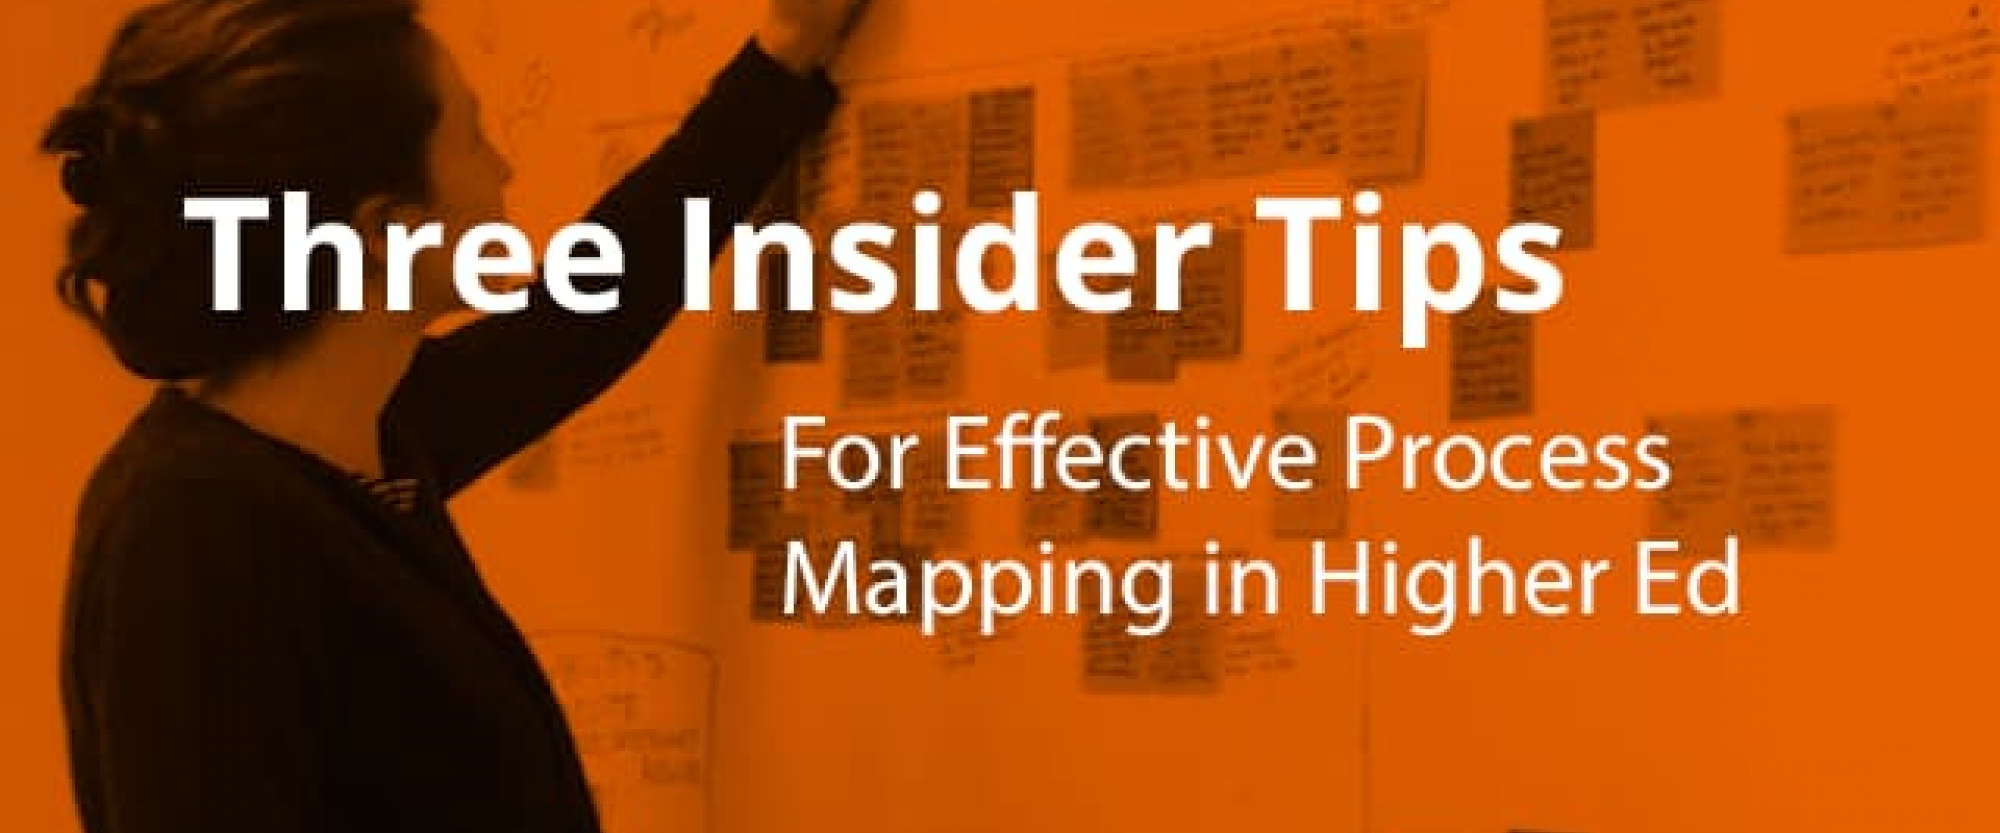 Three Insider Tips for Effective Process Mapping in Higher Ed